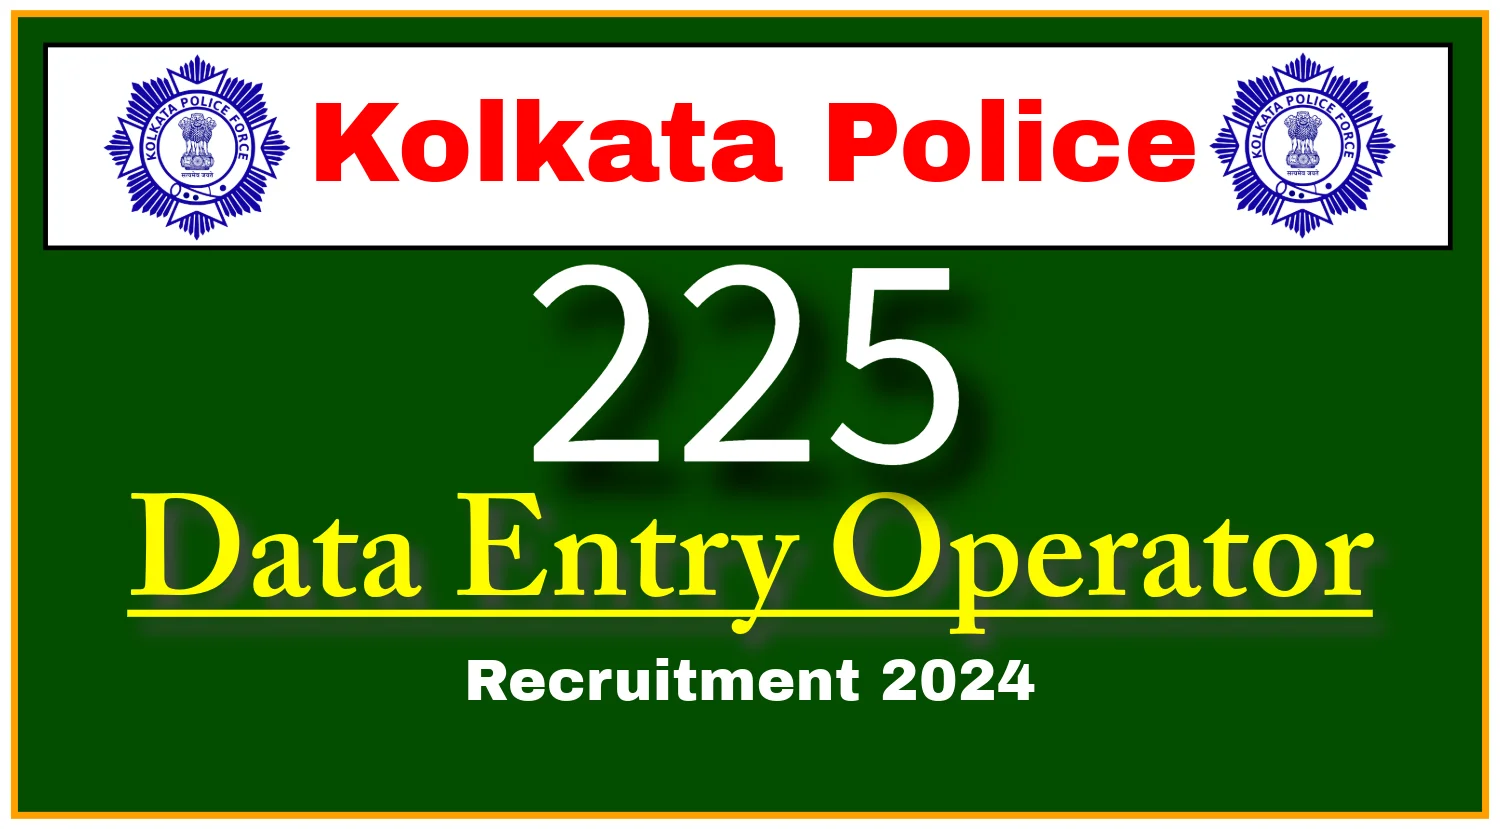 Kolkata Police Recruitment 2024 Notification Out for 225 Data Entry Operators